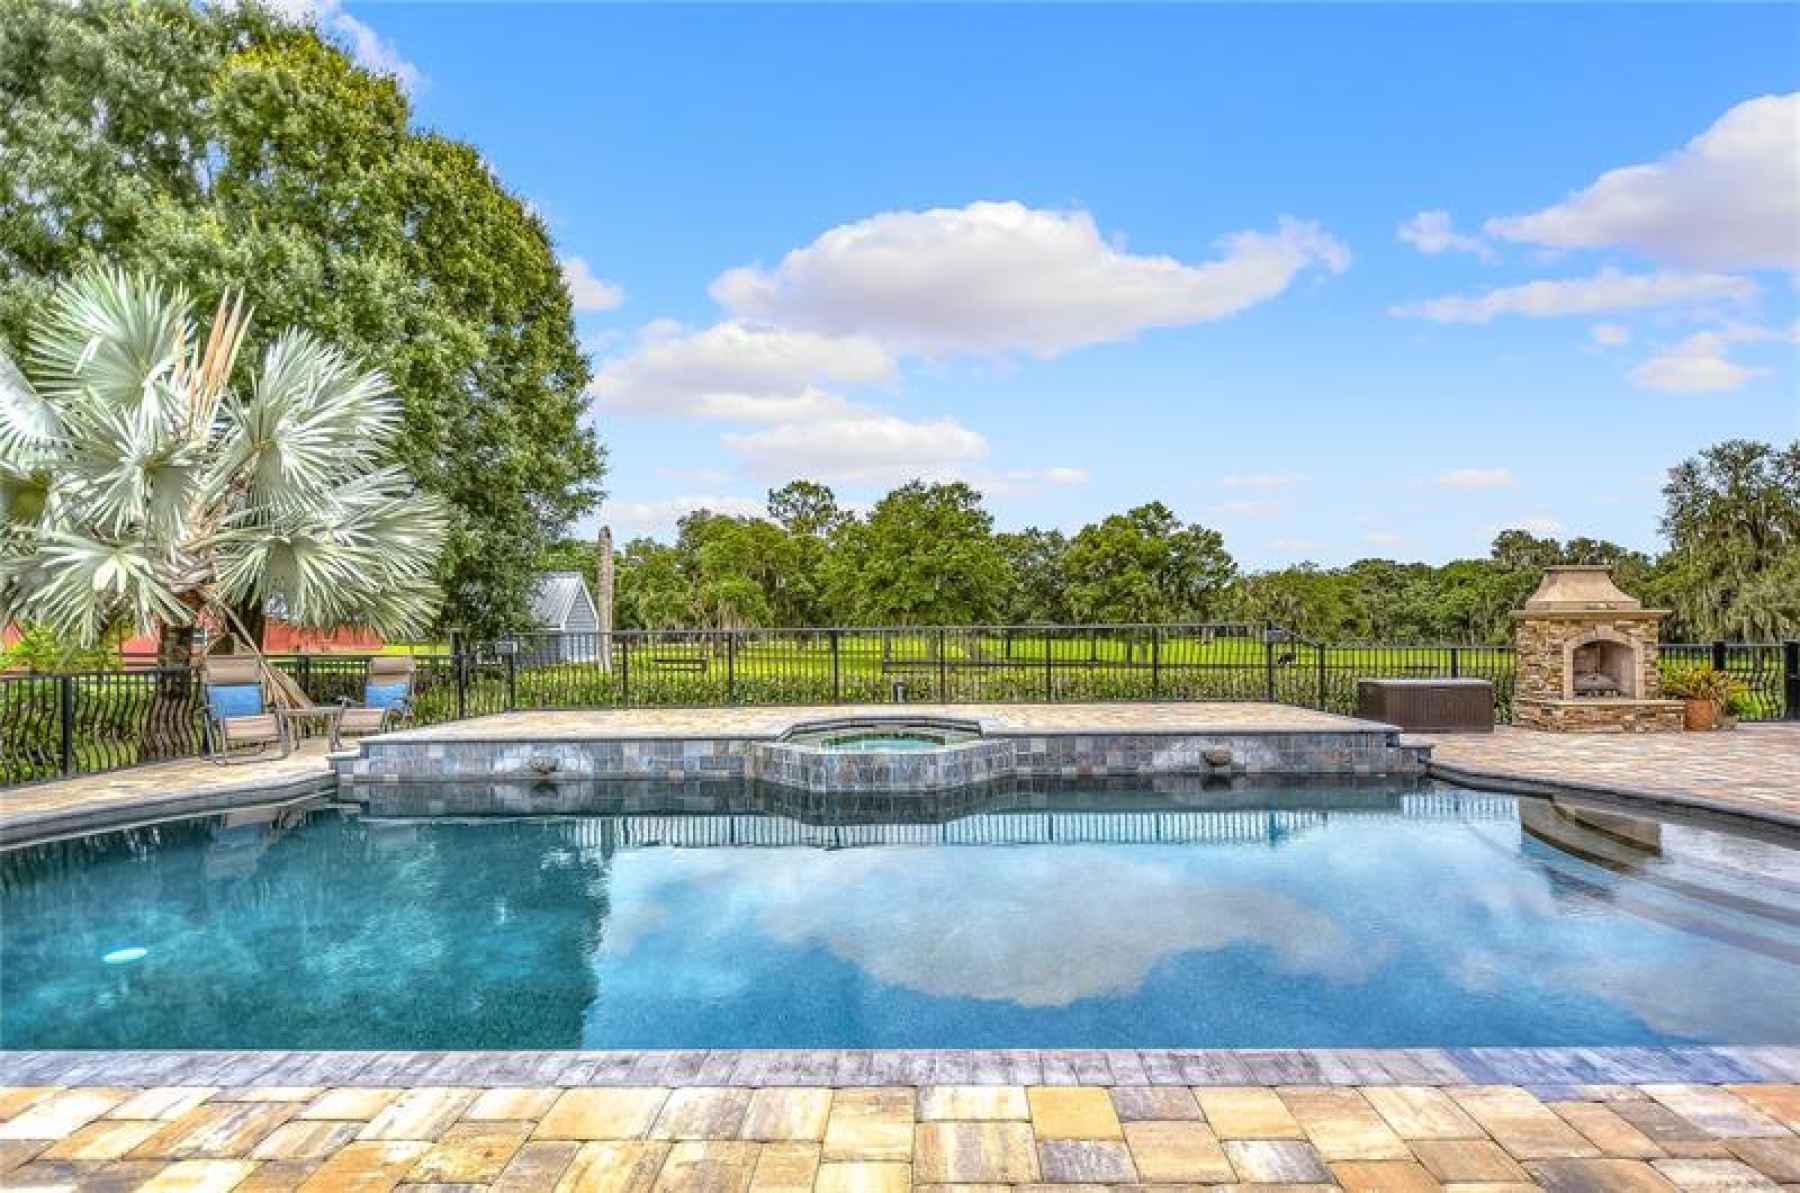 Take a look at this sparkling pool!